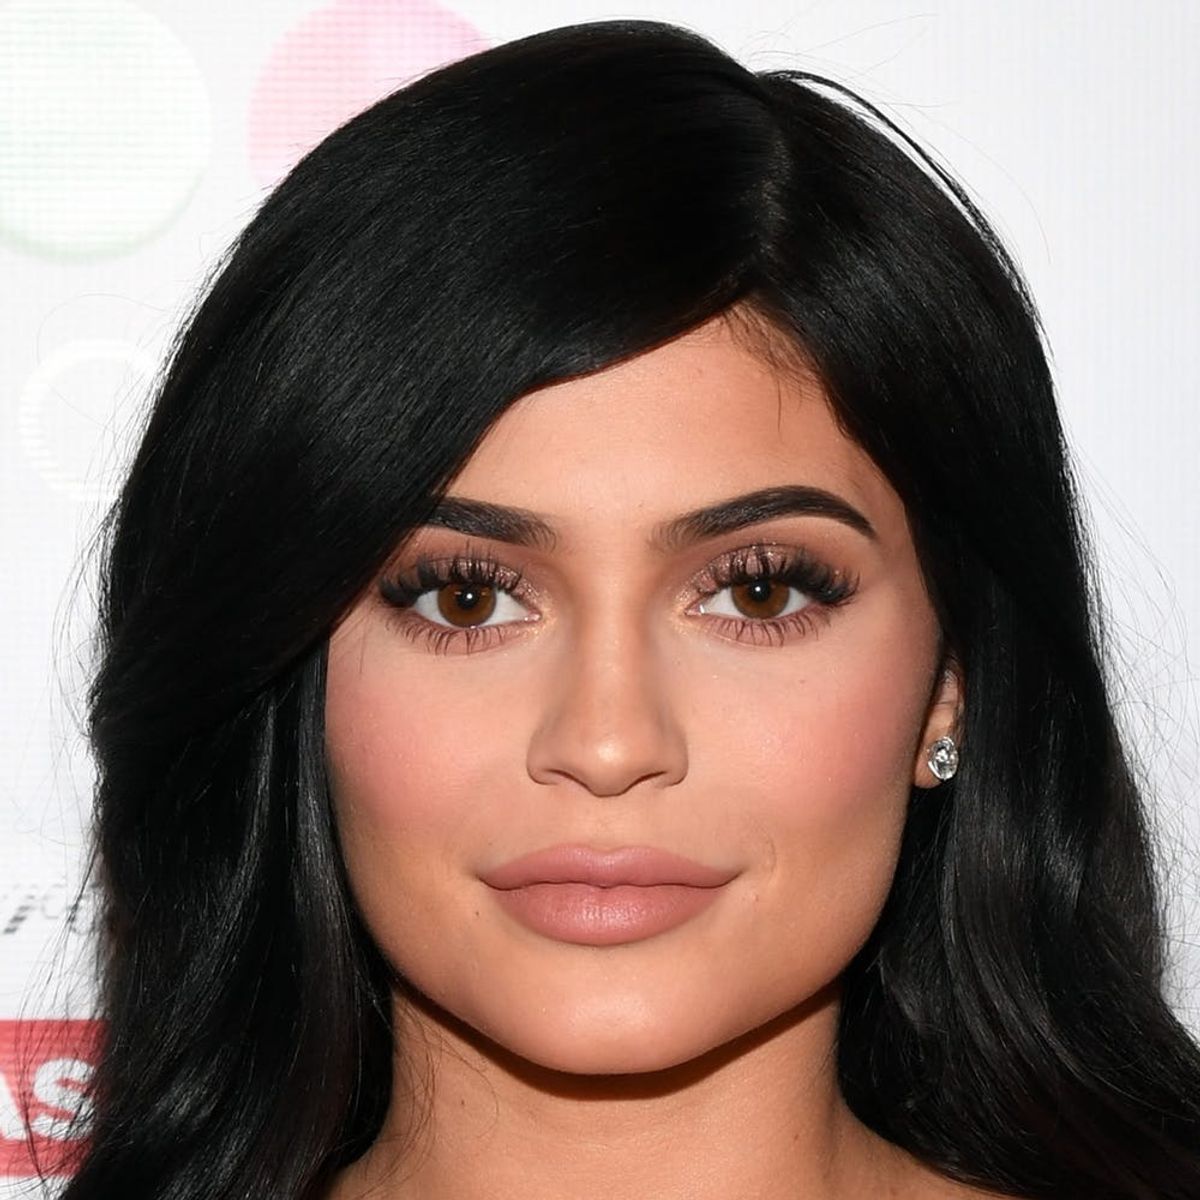 Fans Think Kylie Jenner’s Necklace Could Be Another Pregnancy Clue